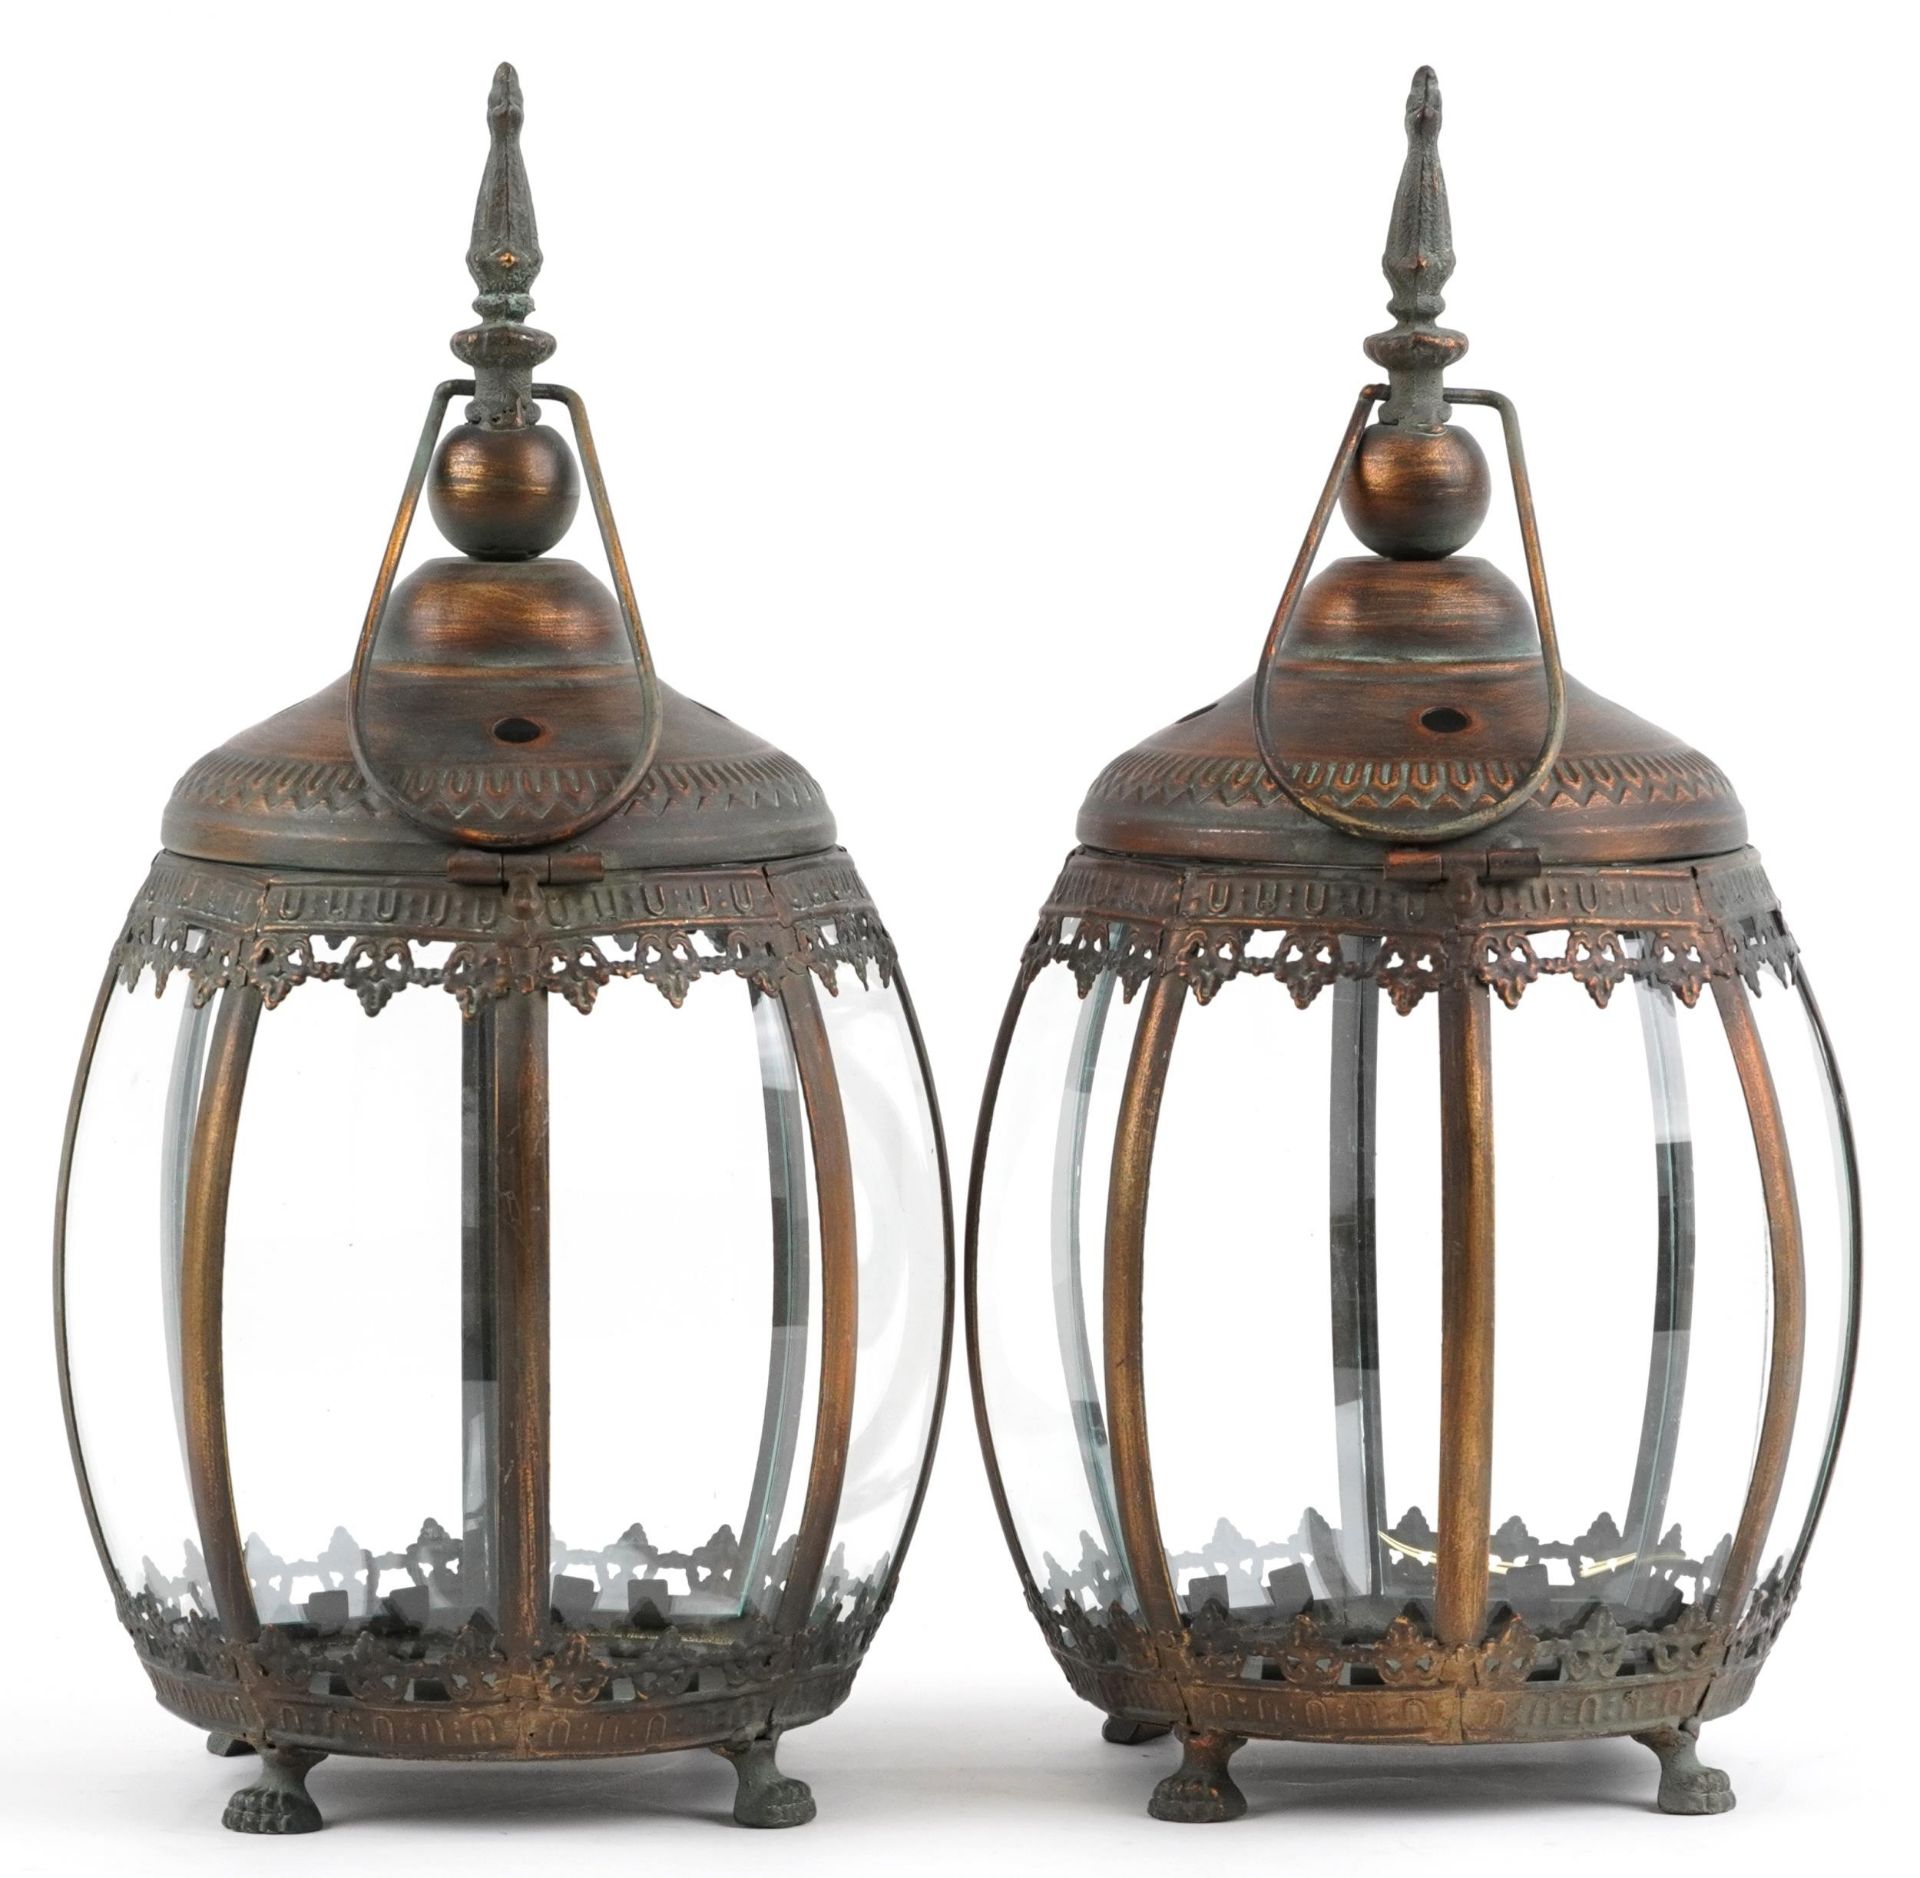 Pair of bronzed hanging lanterns with glass panels on paw feet, each 39.5cm high : For further - Image 2 of 3